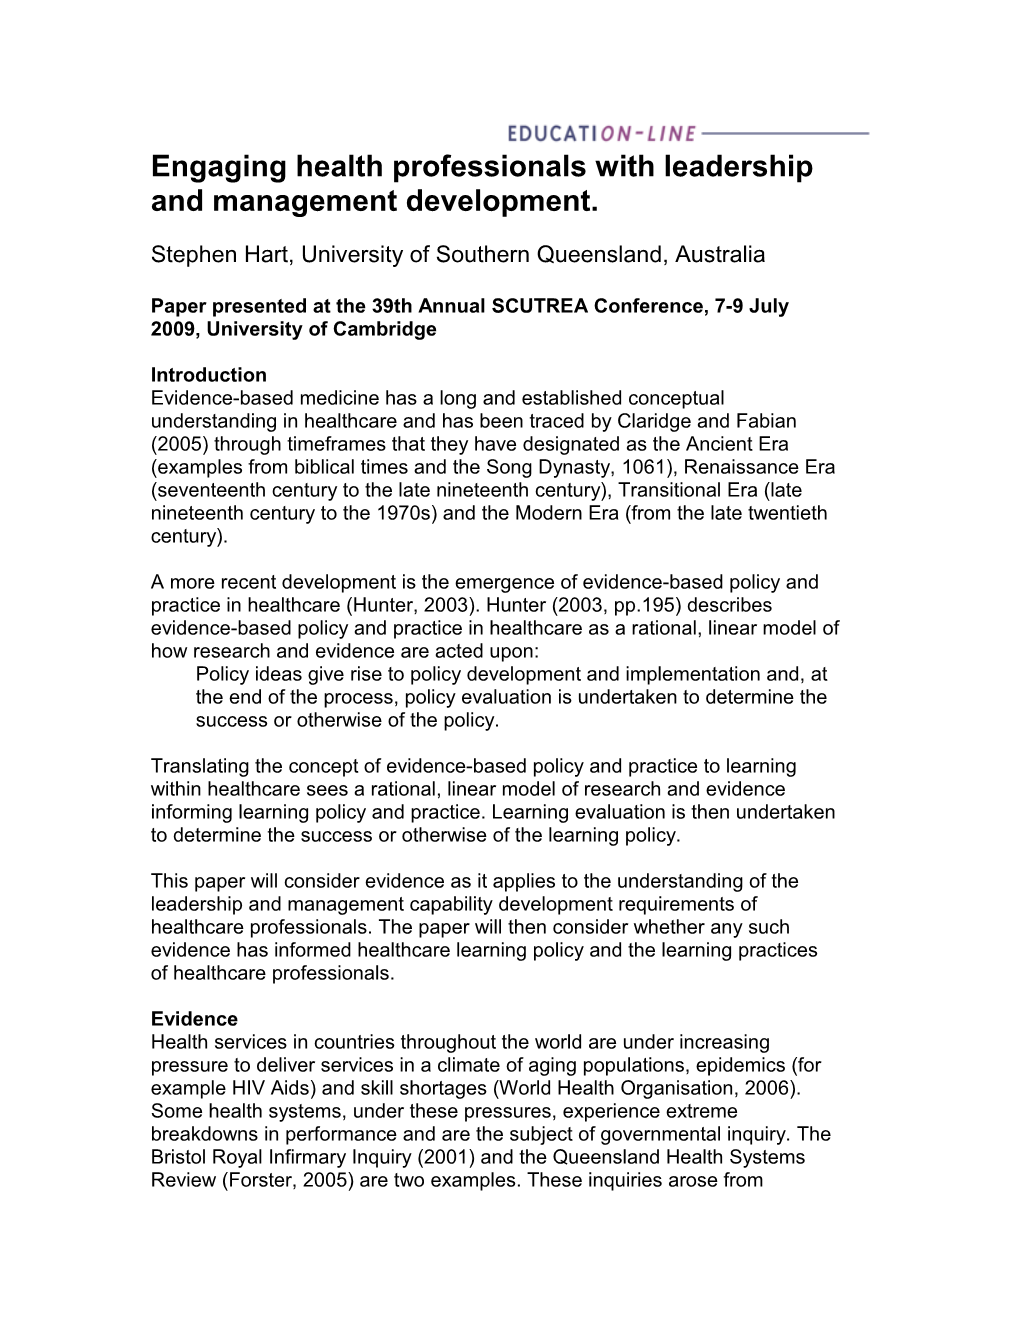 Engaging Health Professionals with Leadership and Management Development